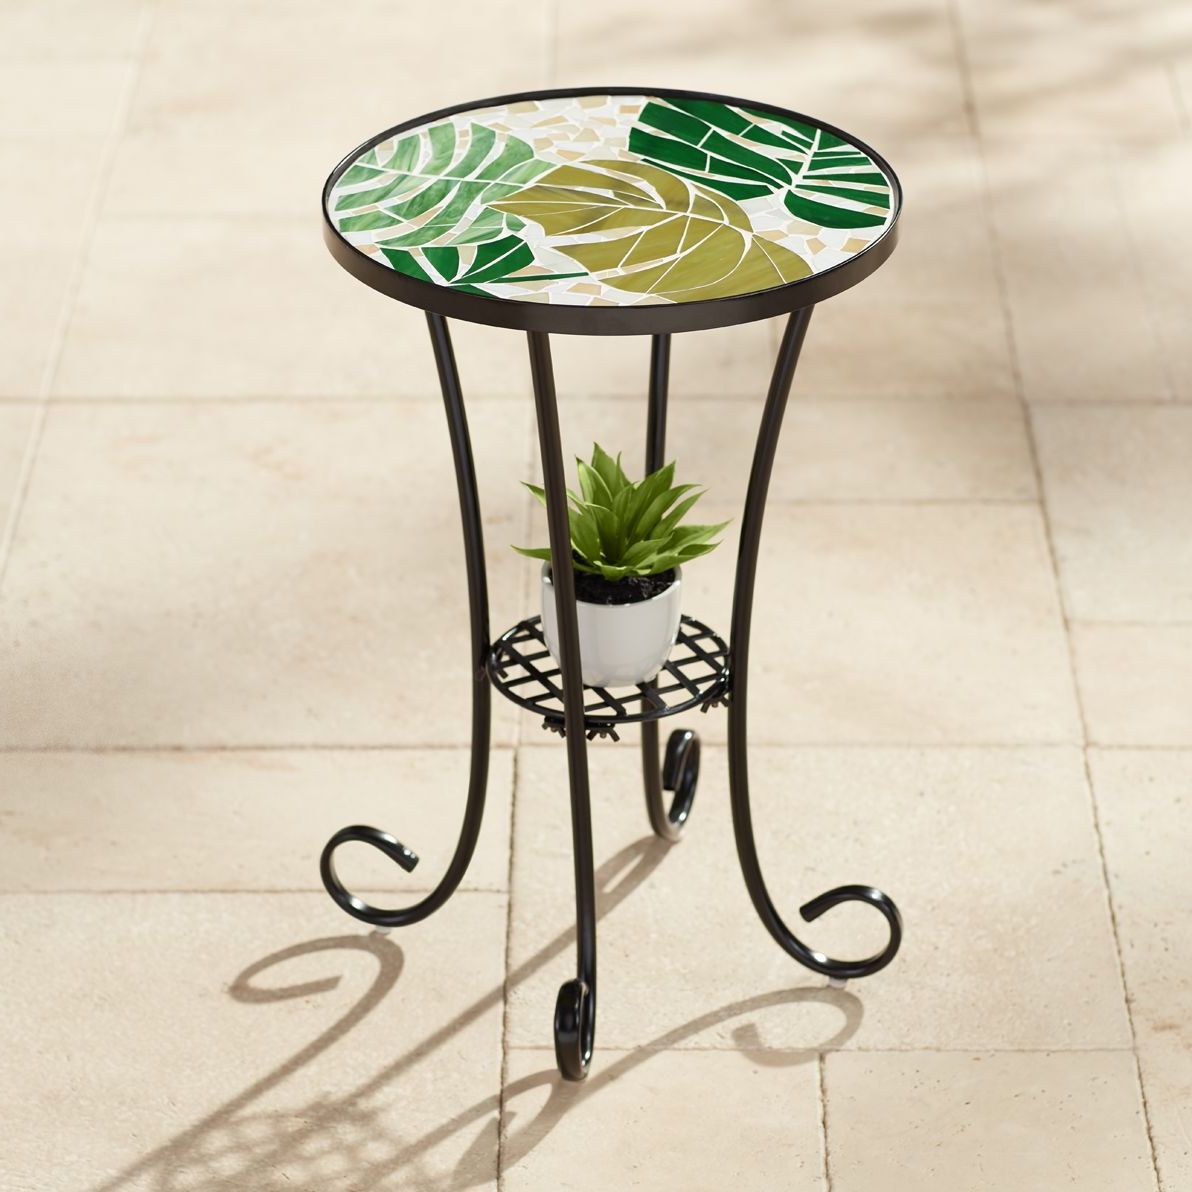 Fashionable Teal Island Designs Modern Black Metal Round Outdoor Accent Side Table 14"  Wide Green Leaf Mosaic Tabletop For Front Porch Patio Home House –  Walmart Regarding Black Accent Outdoor Tables (View 6 of 15)